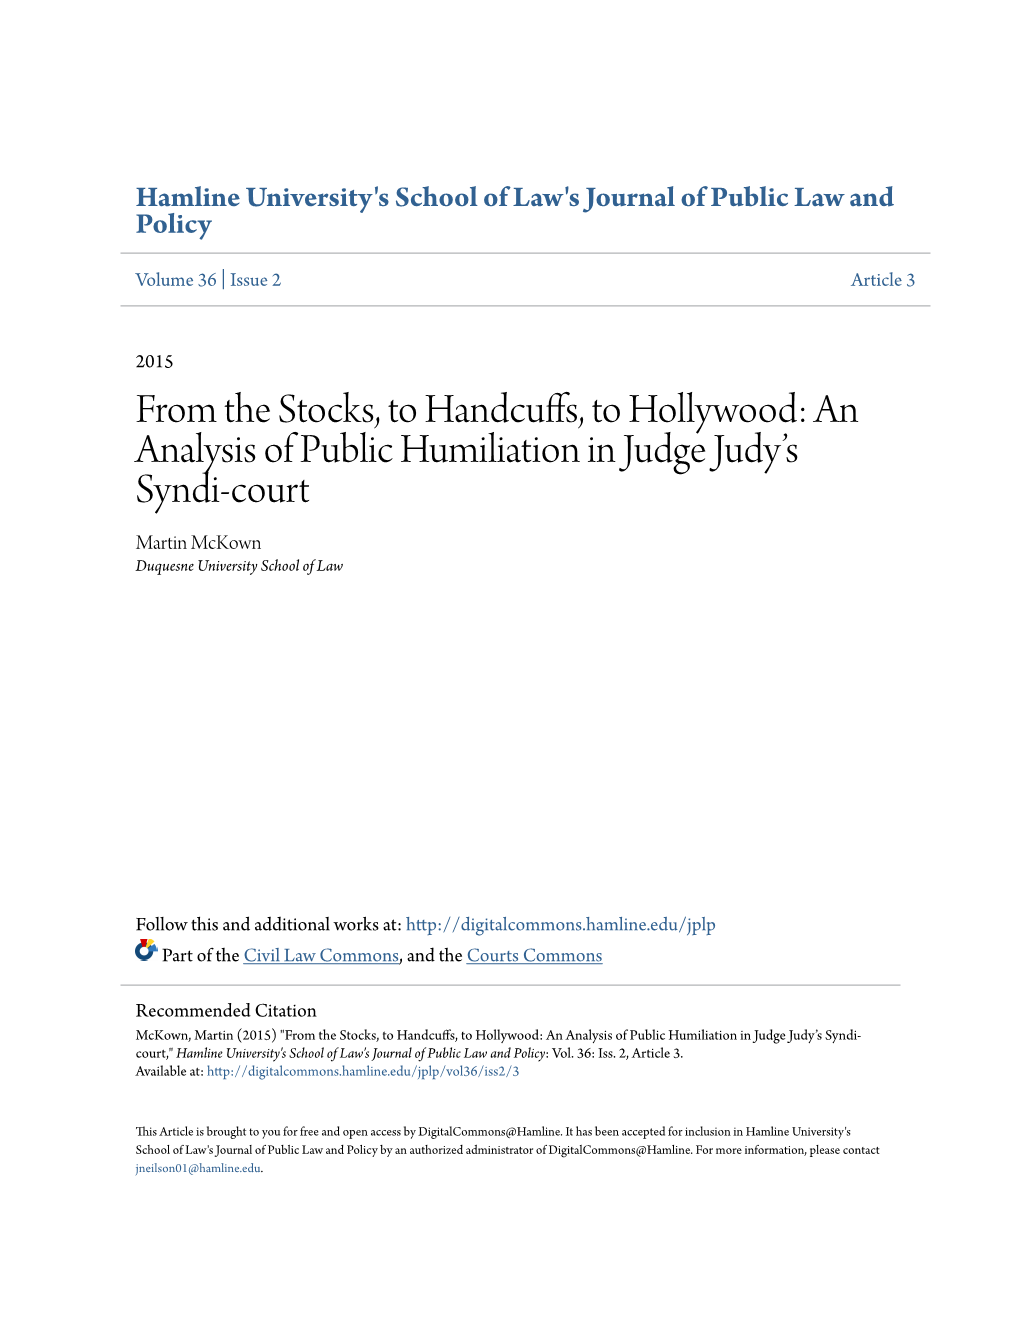 From the Stocks, to Handcuffs, to Hollywood: an Analysis of Public Humiliation in Judge Judy’S Syndi-Court Martin Mckown Duquesne University School of Law